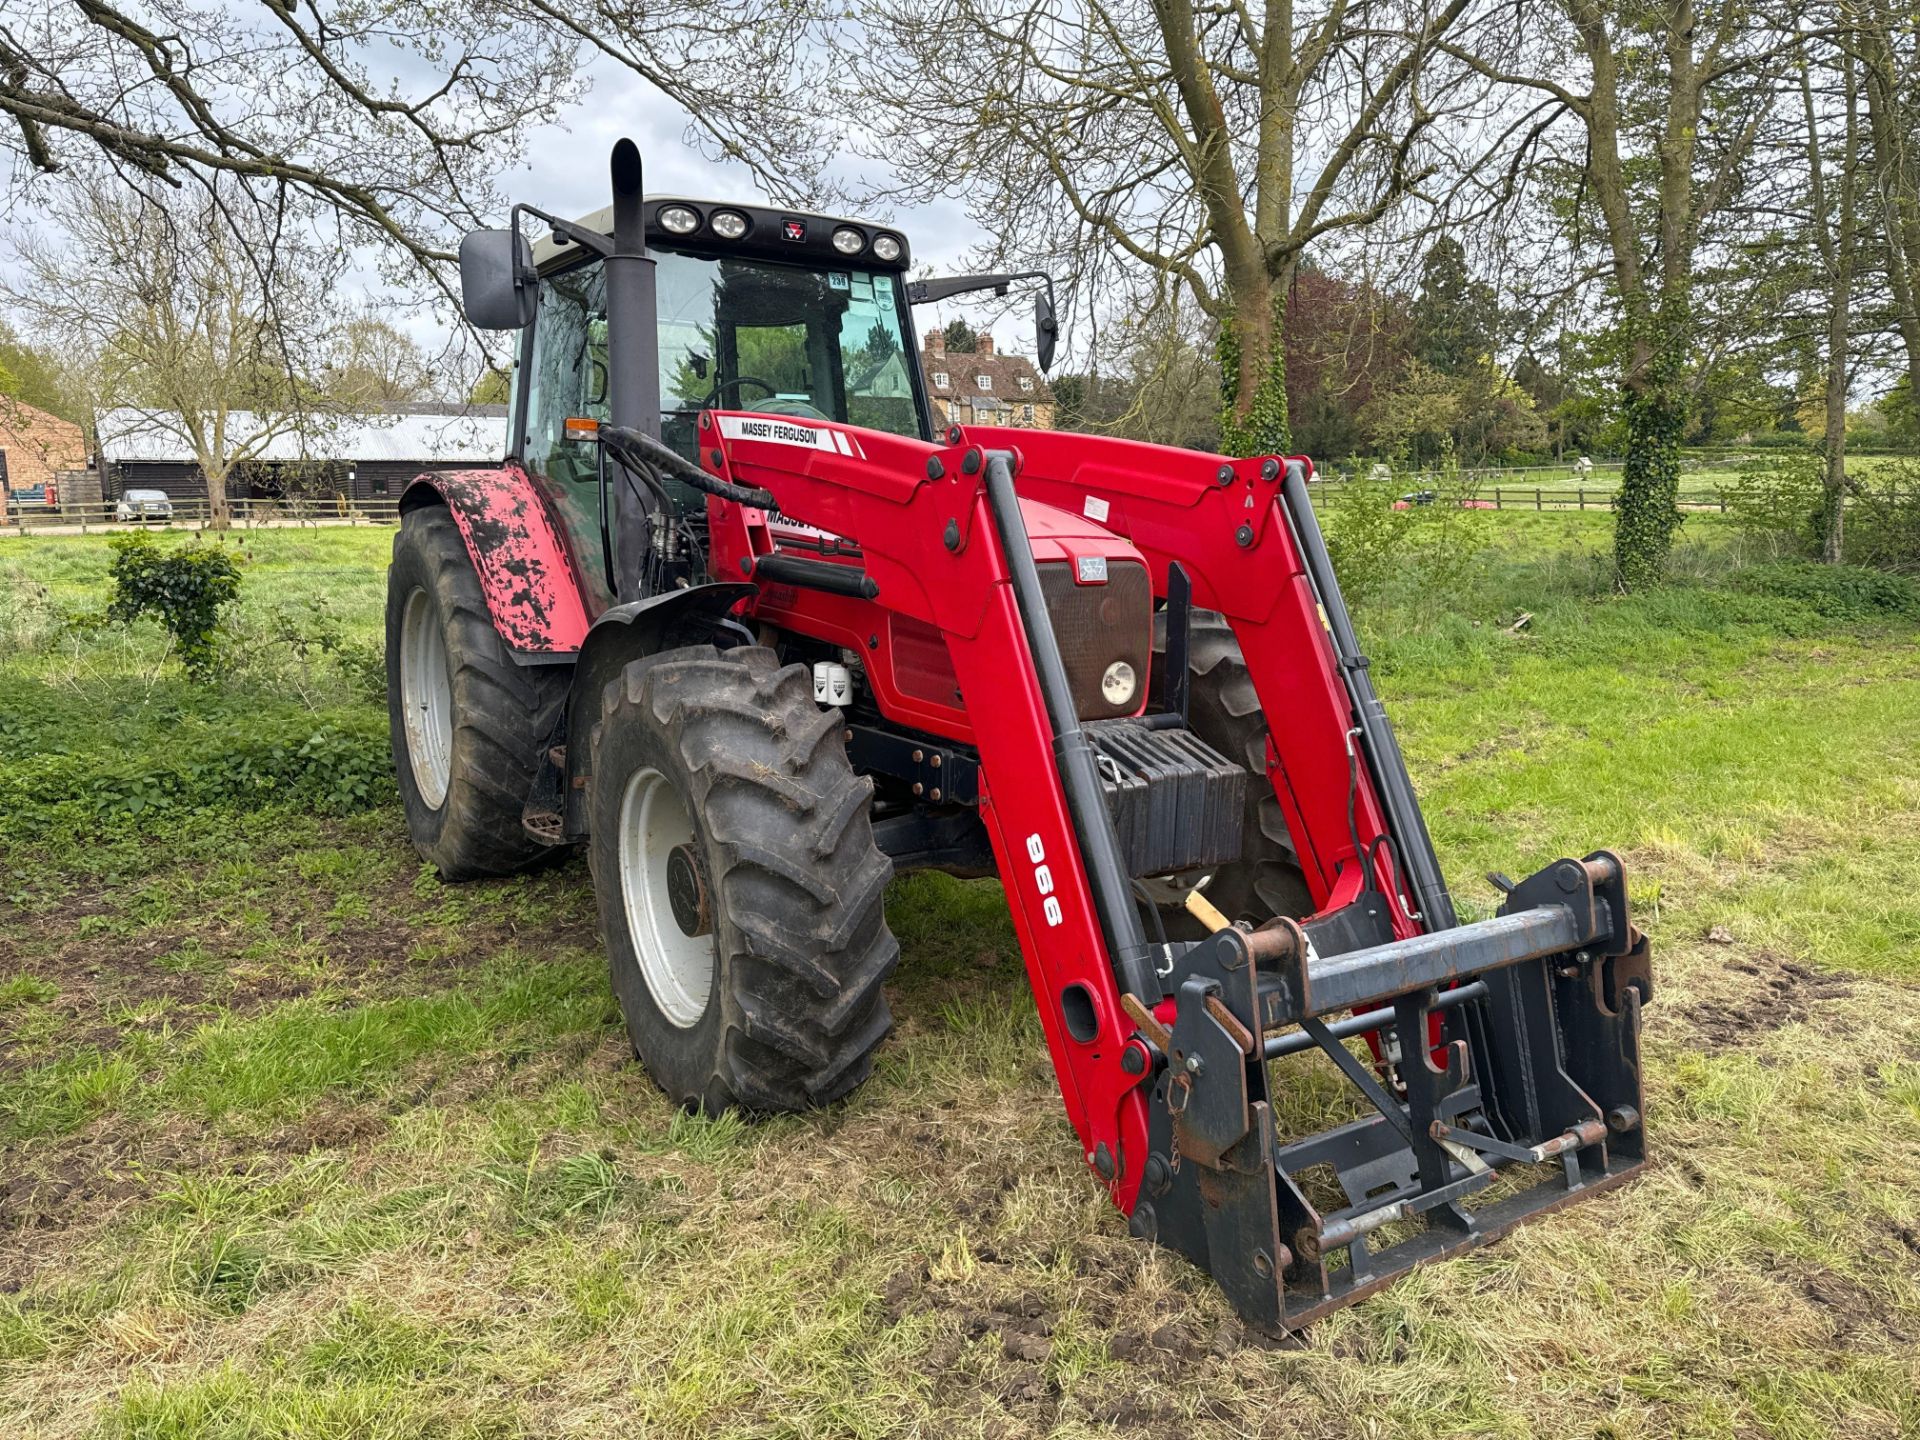 2005 Massey Ferguson 6480 Dynashift 4wd 40kph tractor with 3 manual spools, 10No front wafer weights - Image 26 of 26